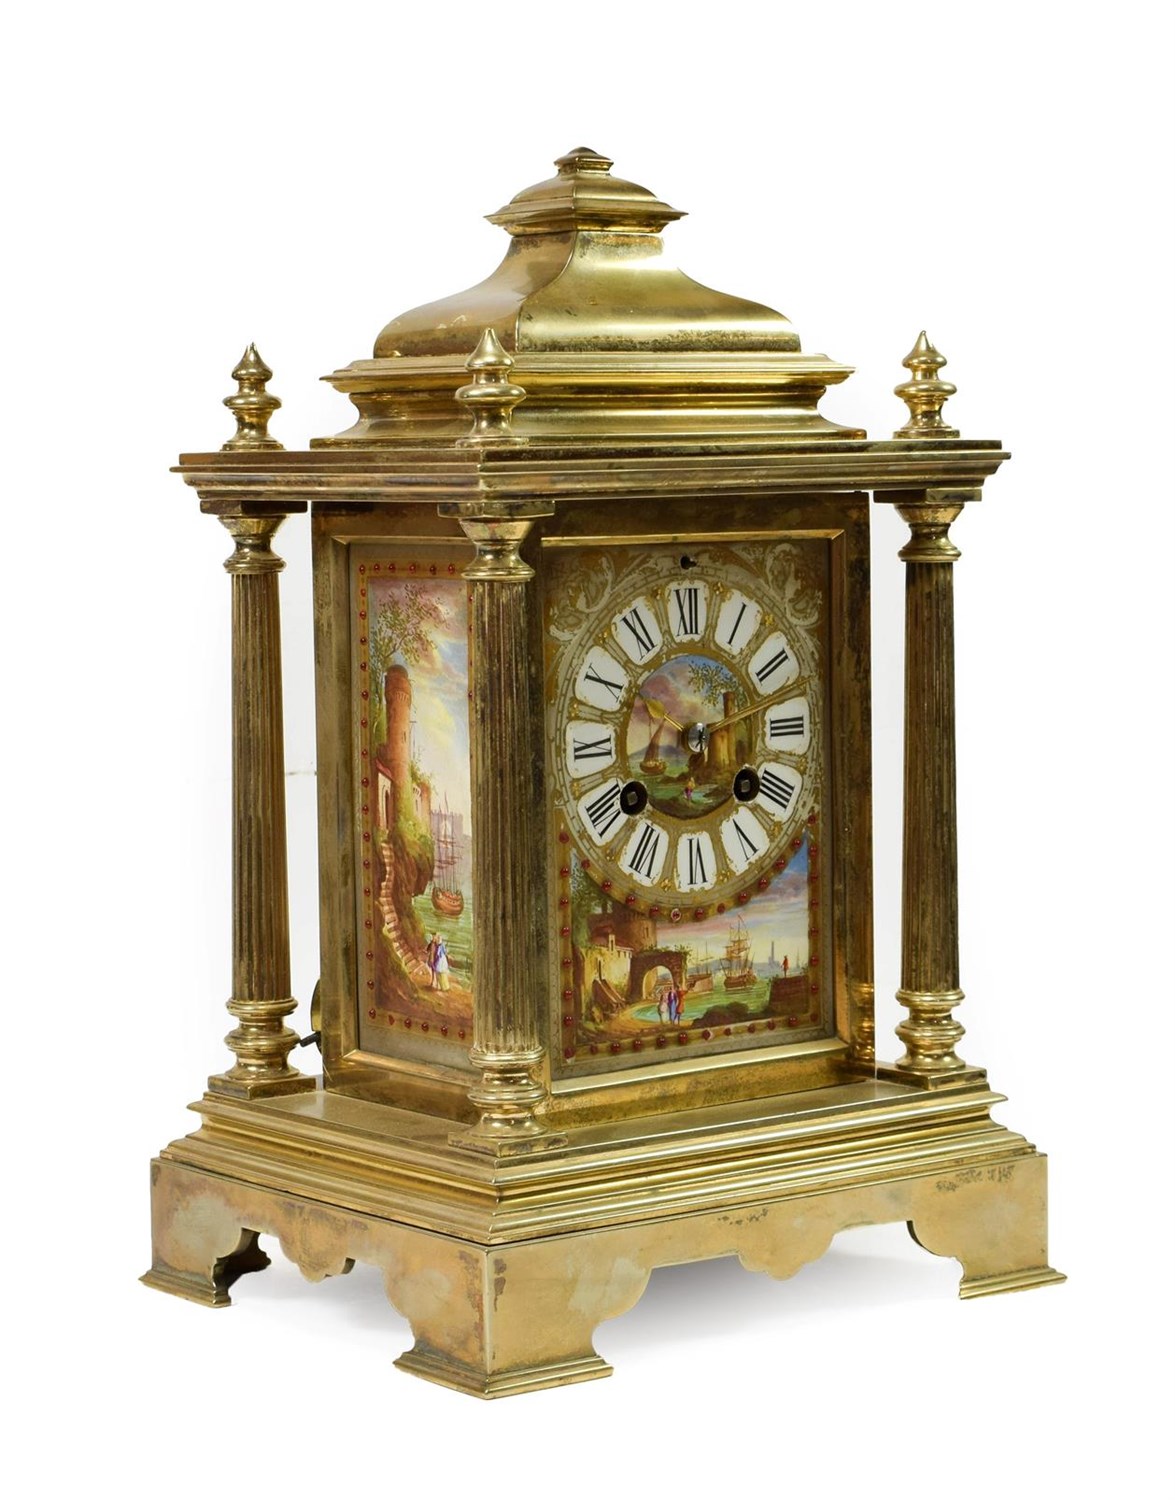 Lot 408 - <> A Brass and Porcelain Mounted Striking Mantel Clock, circa 1890, caddy pediment with four turned